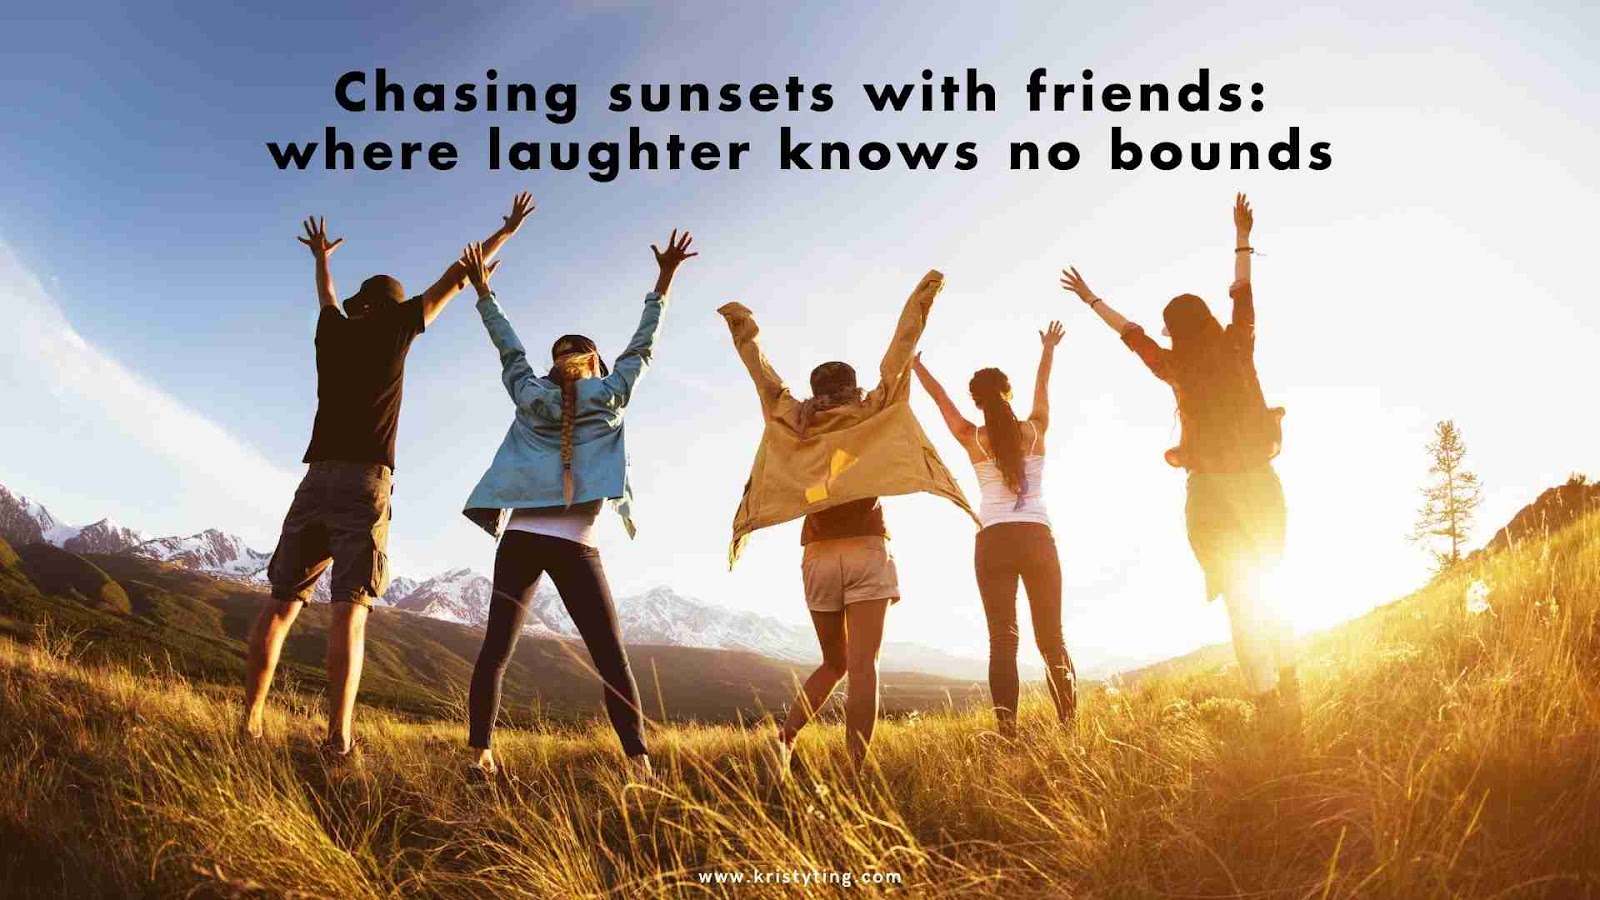 A group of friends jumping joyfully in a field at sunset.